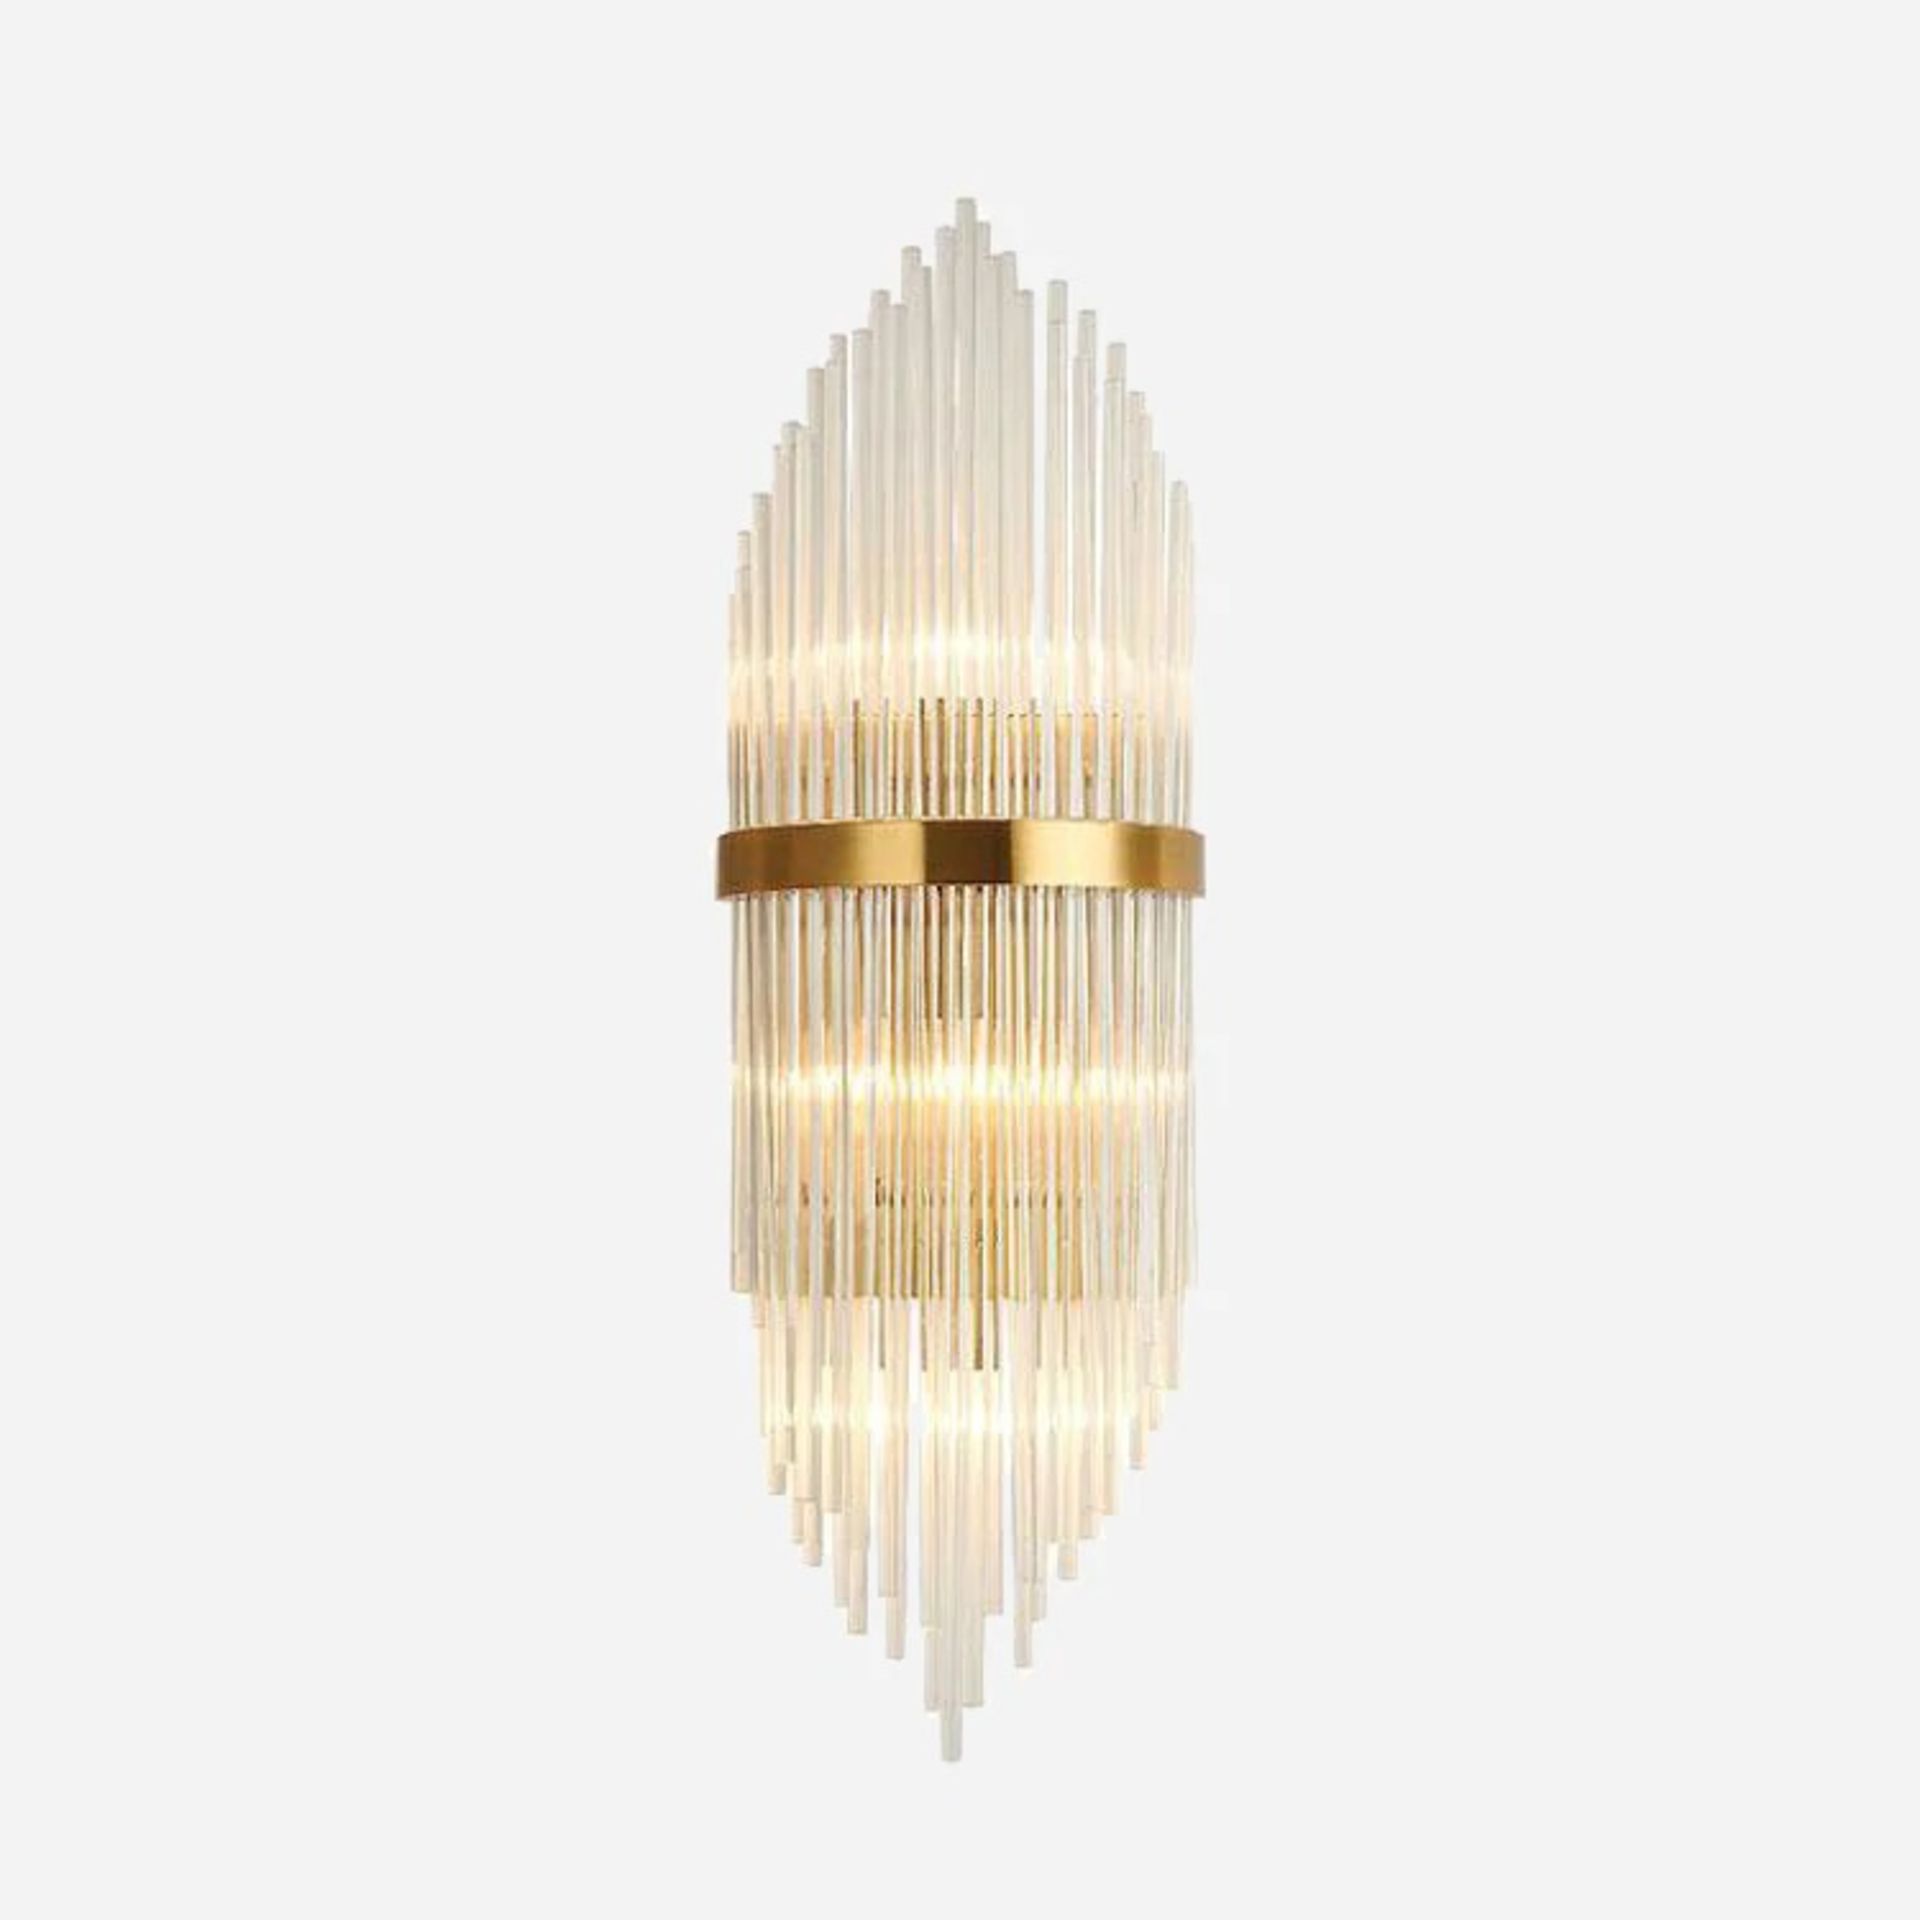 Oriana Crystal Wall Light This exquisite wall sconce is in an antique brass finish. The frame is - Image 2 of 2